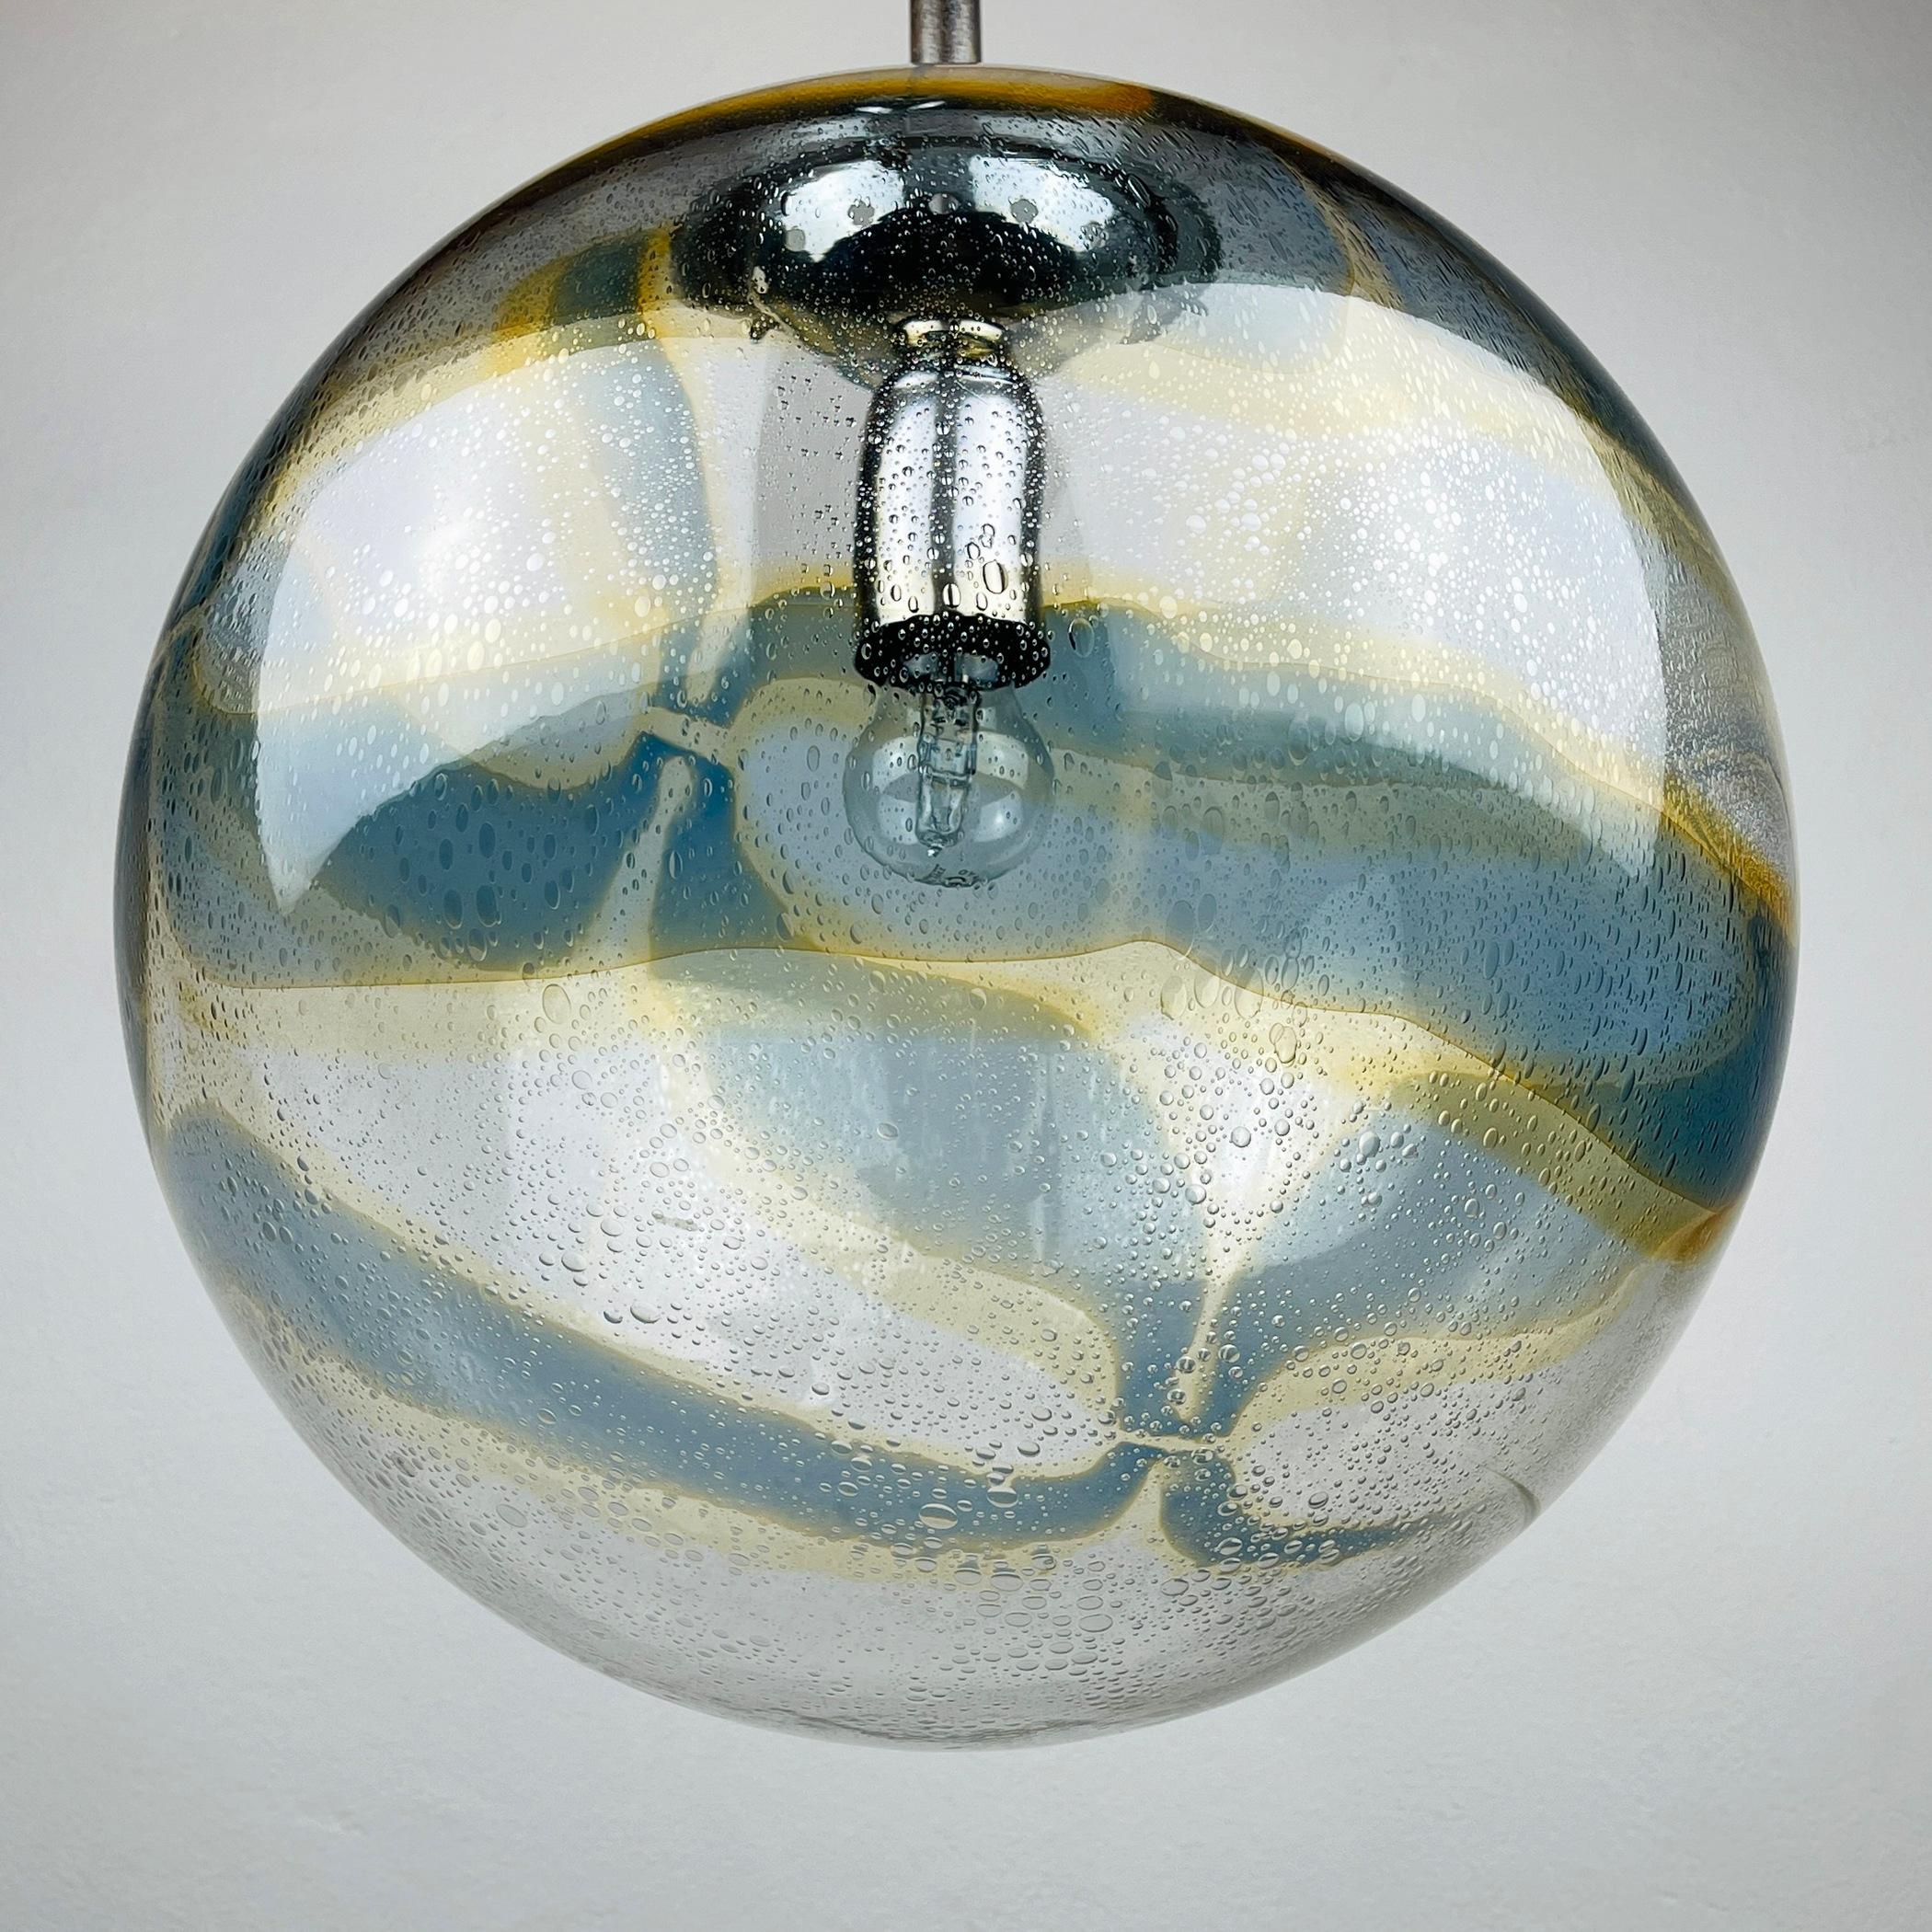 Vintage Xl Swirled Murano Glass Pendant Lamp by Vistosi Italy, 1970s For Sale 4